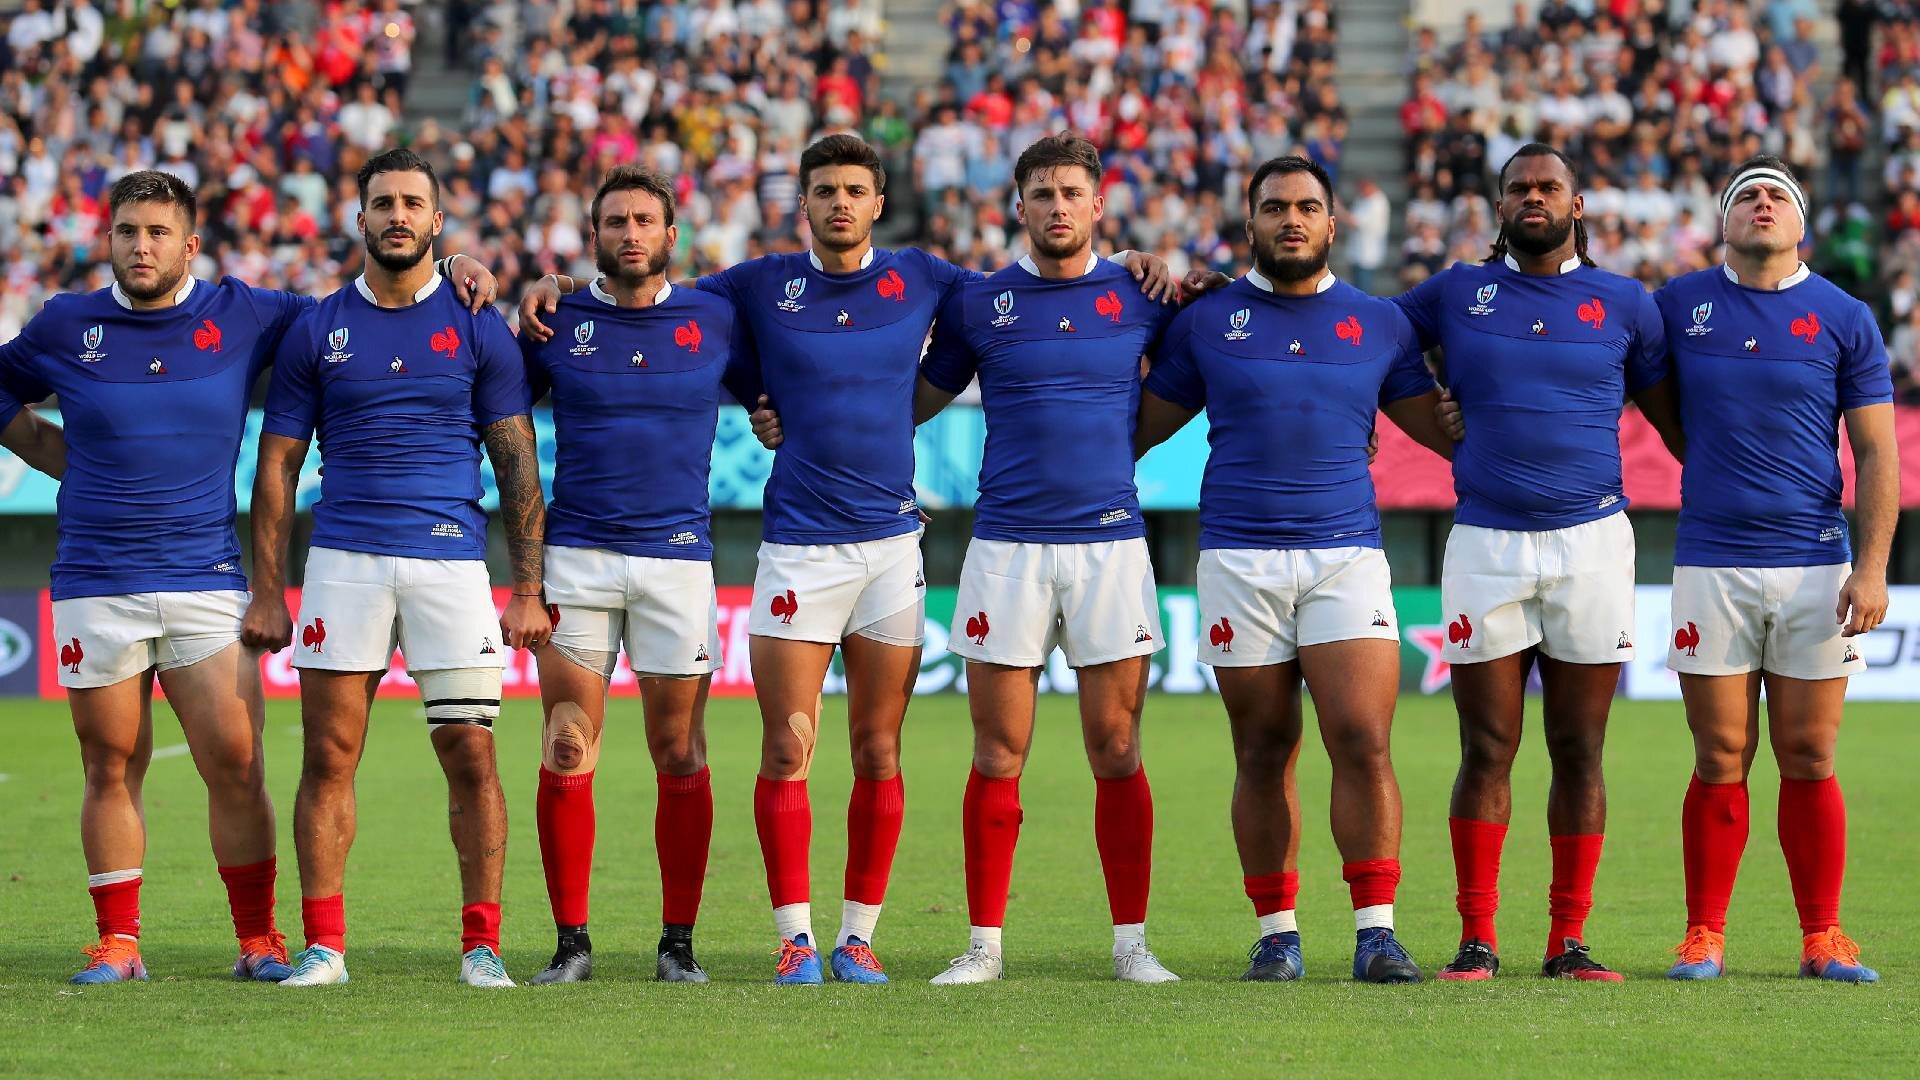 World Cup chaos Mutiny call follows axing of French captain ahead of